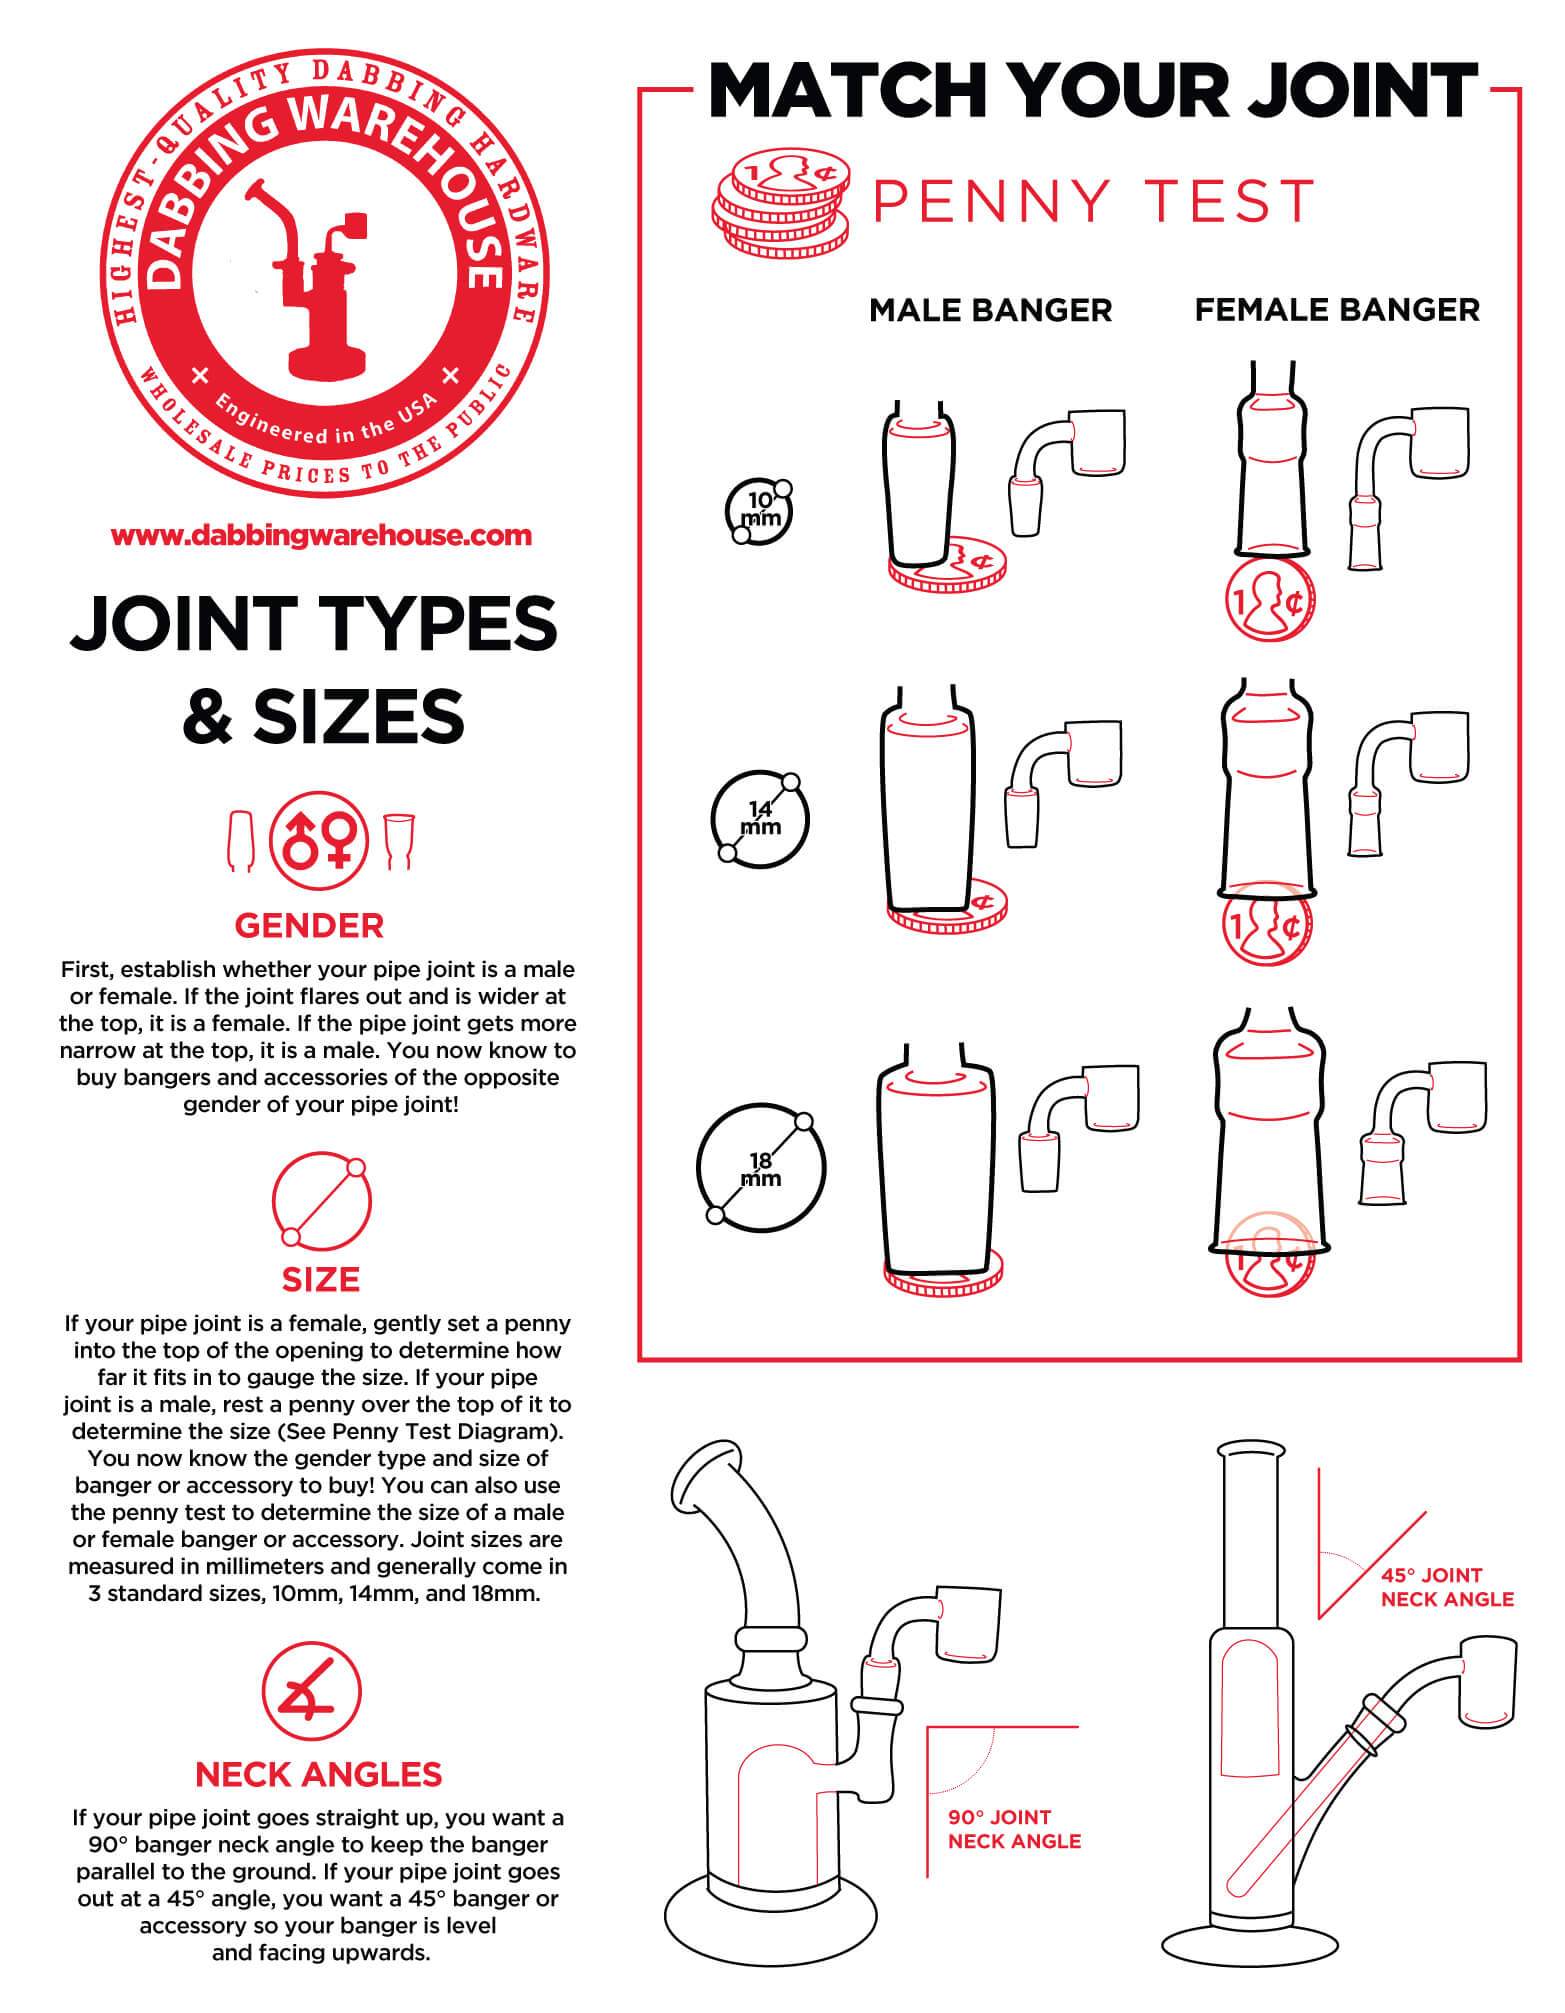 A Complete Guide to Joint Types & Sizes | Dabbing Warehouse